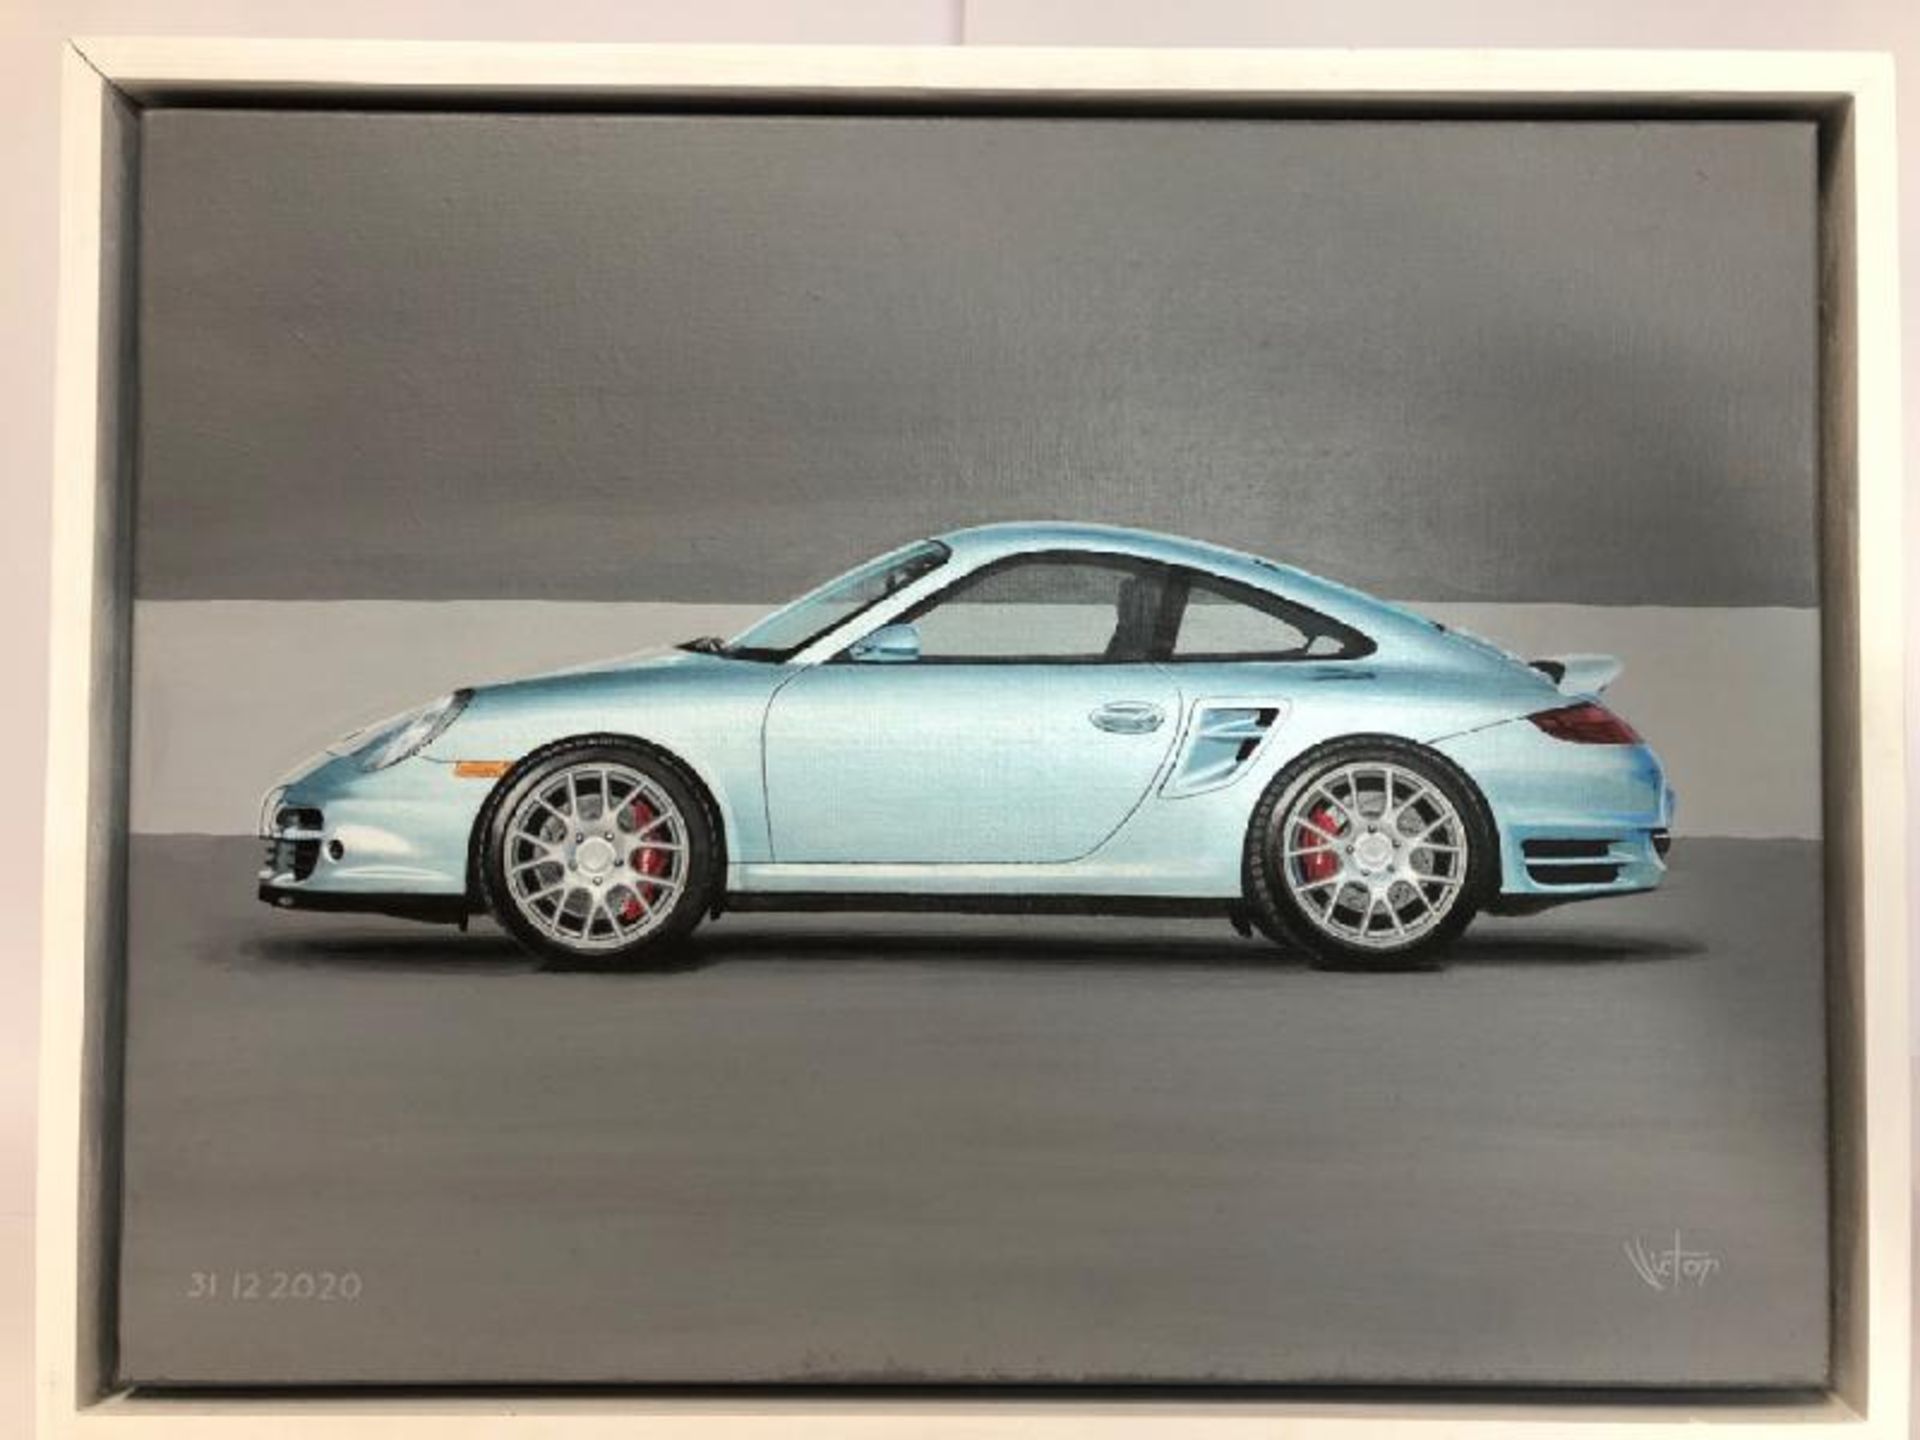 John Victor, "Metallic Blue Sky" (Porsche 911 Turbo) acrylic on canvas, signed with certificate,